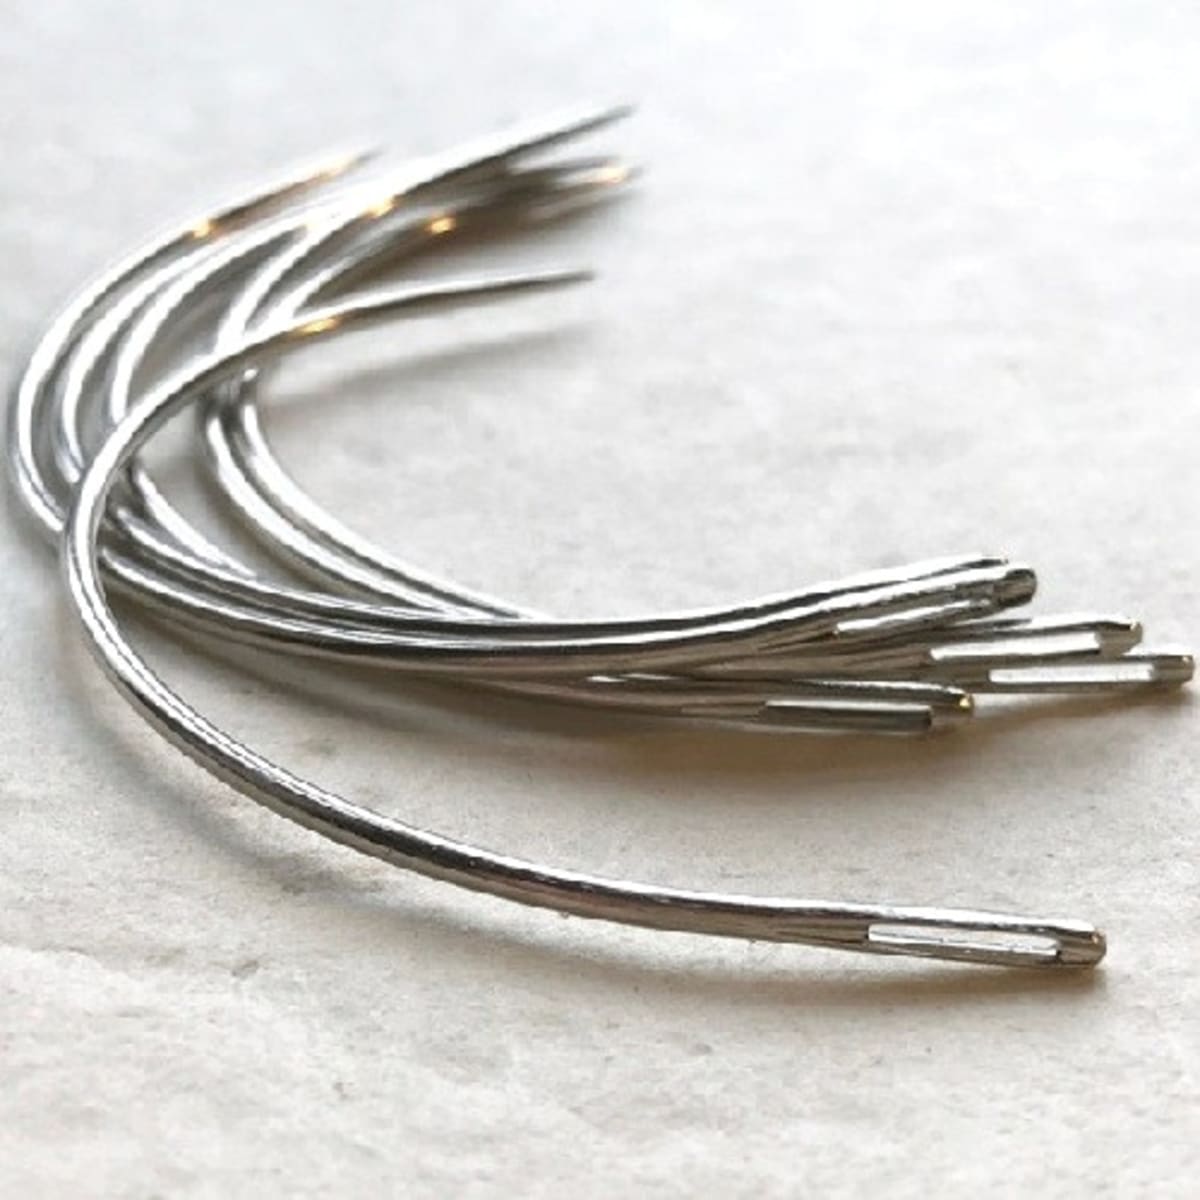 Curved Needles - 6 Pieces